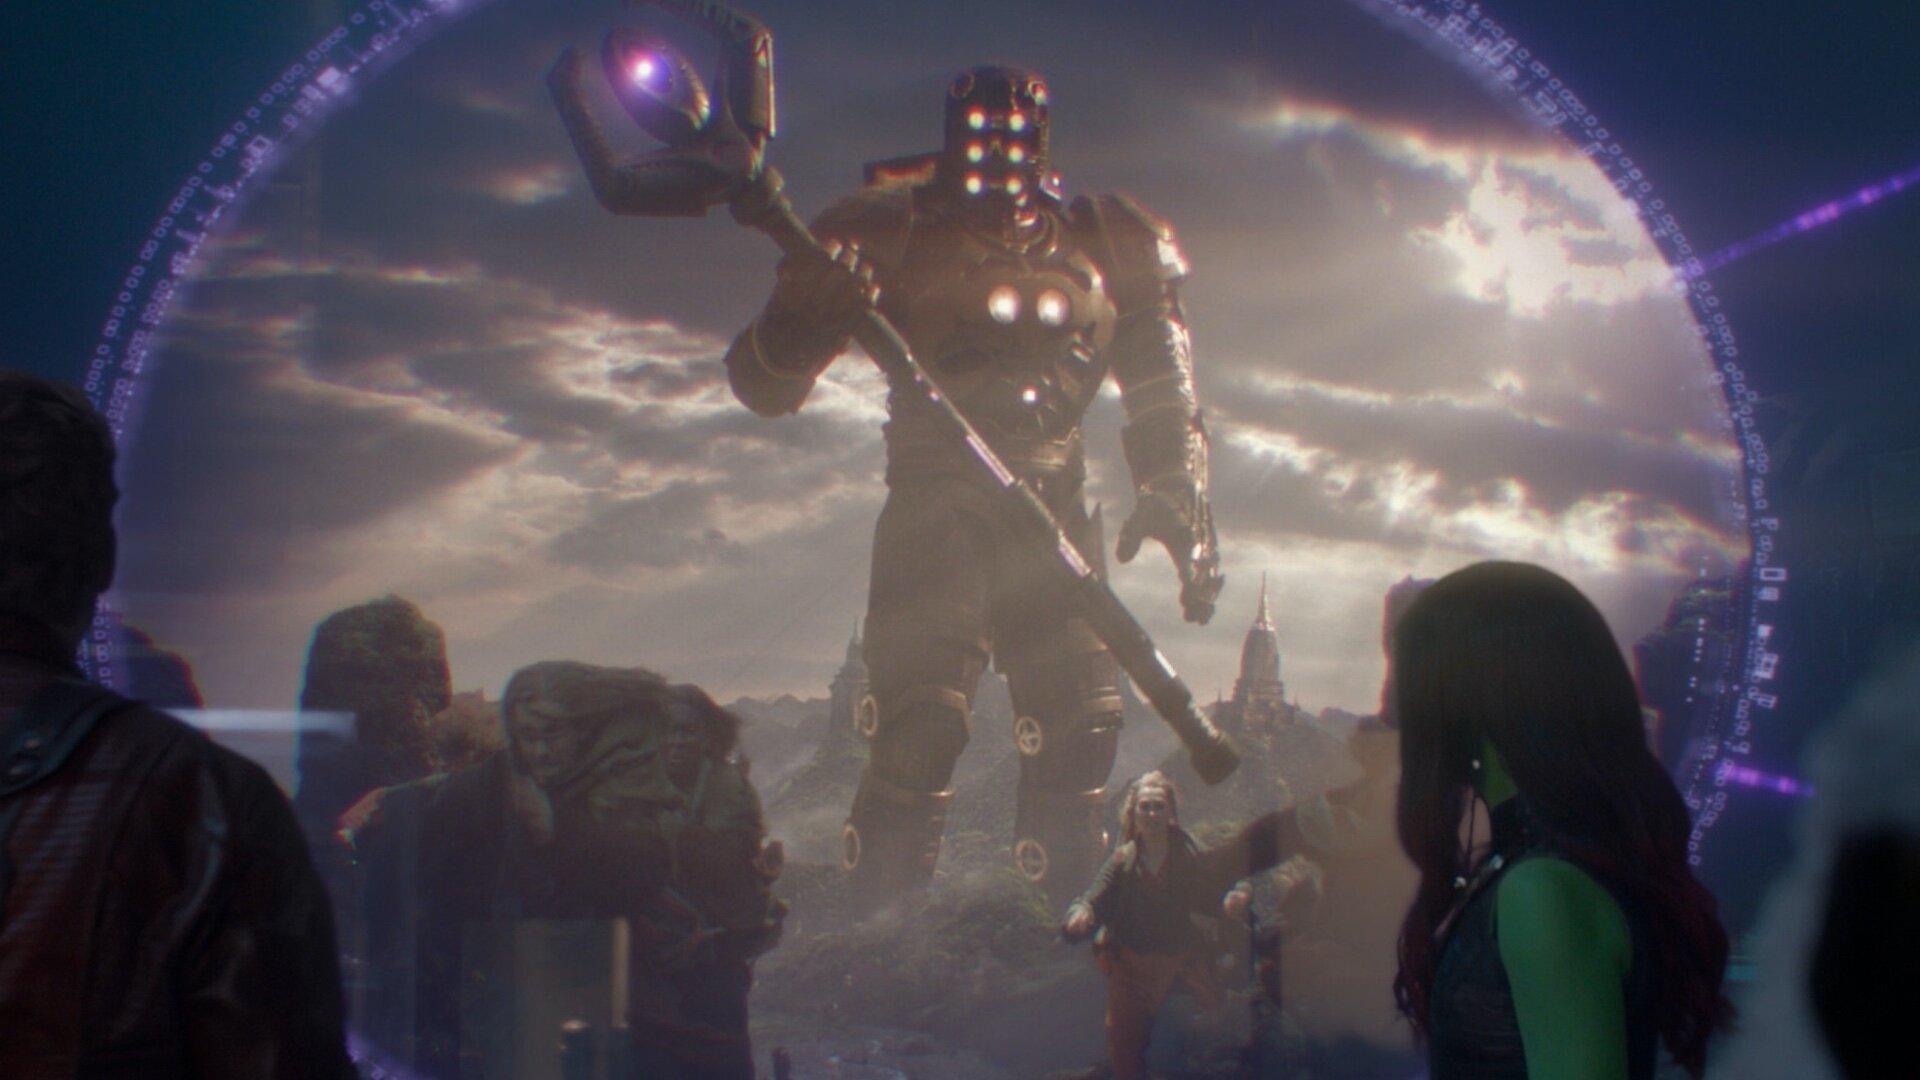 Marvel Studios Shares a Synopsis For ETERNALS